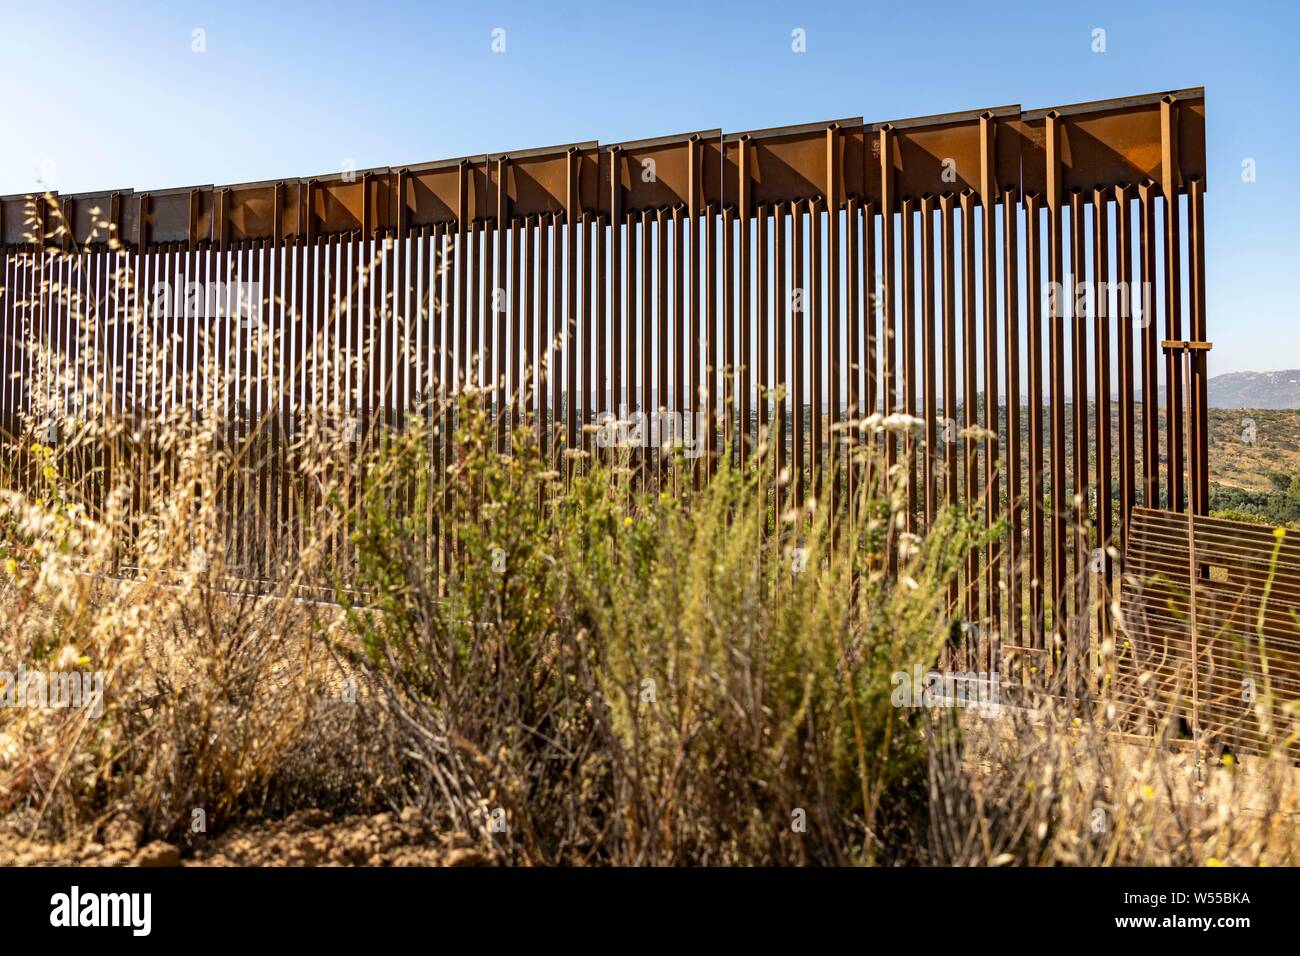 A section of replacement border wall along the southern border with Mexico June 19, 2019 near Tecate, California. The replacement was authorized under the Obama administration and is in the process of being completed. Stock Photo